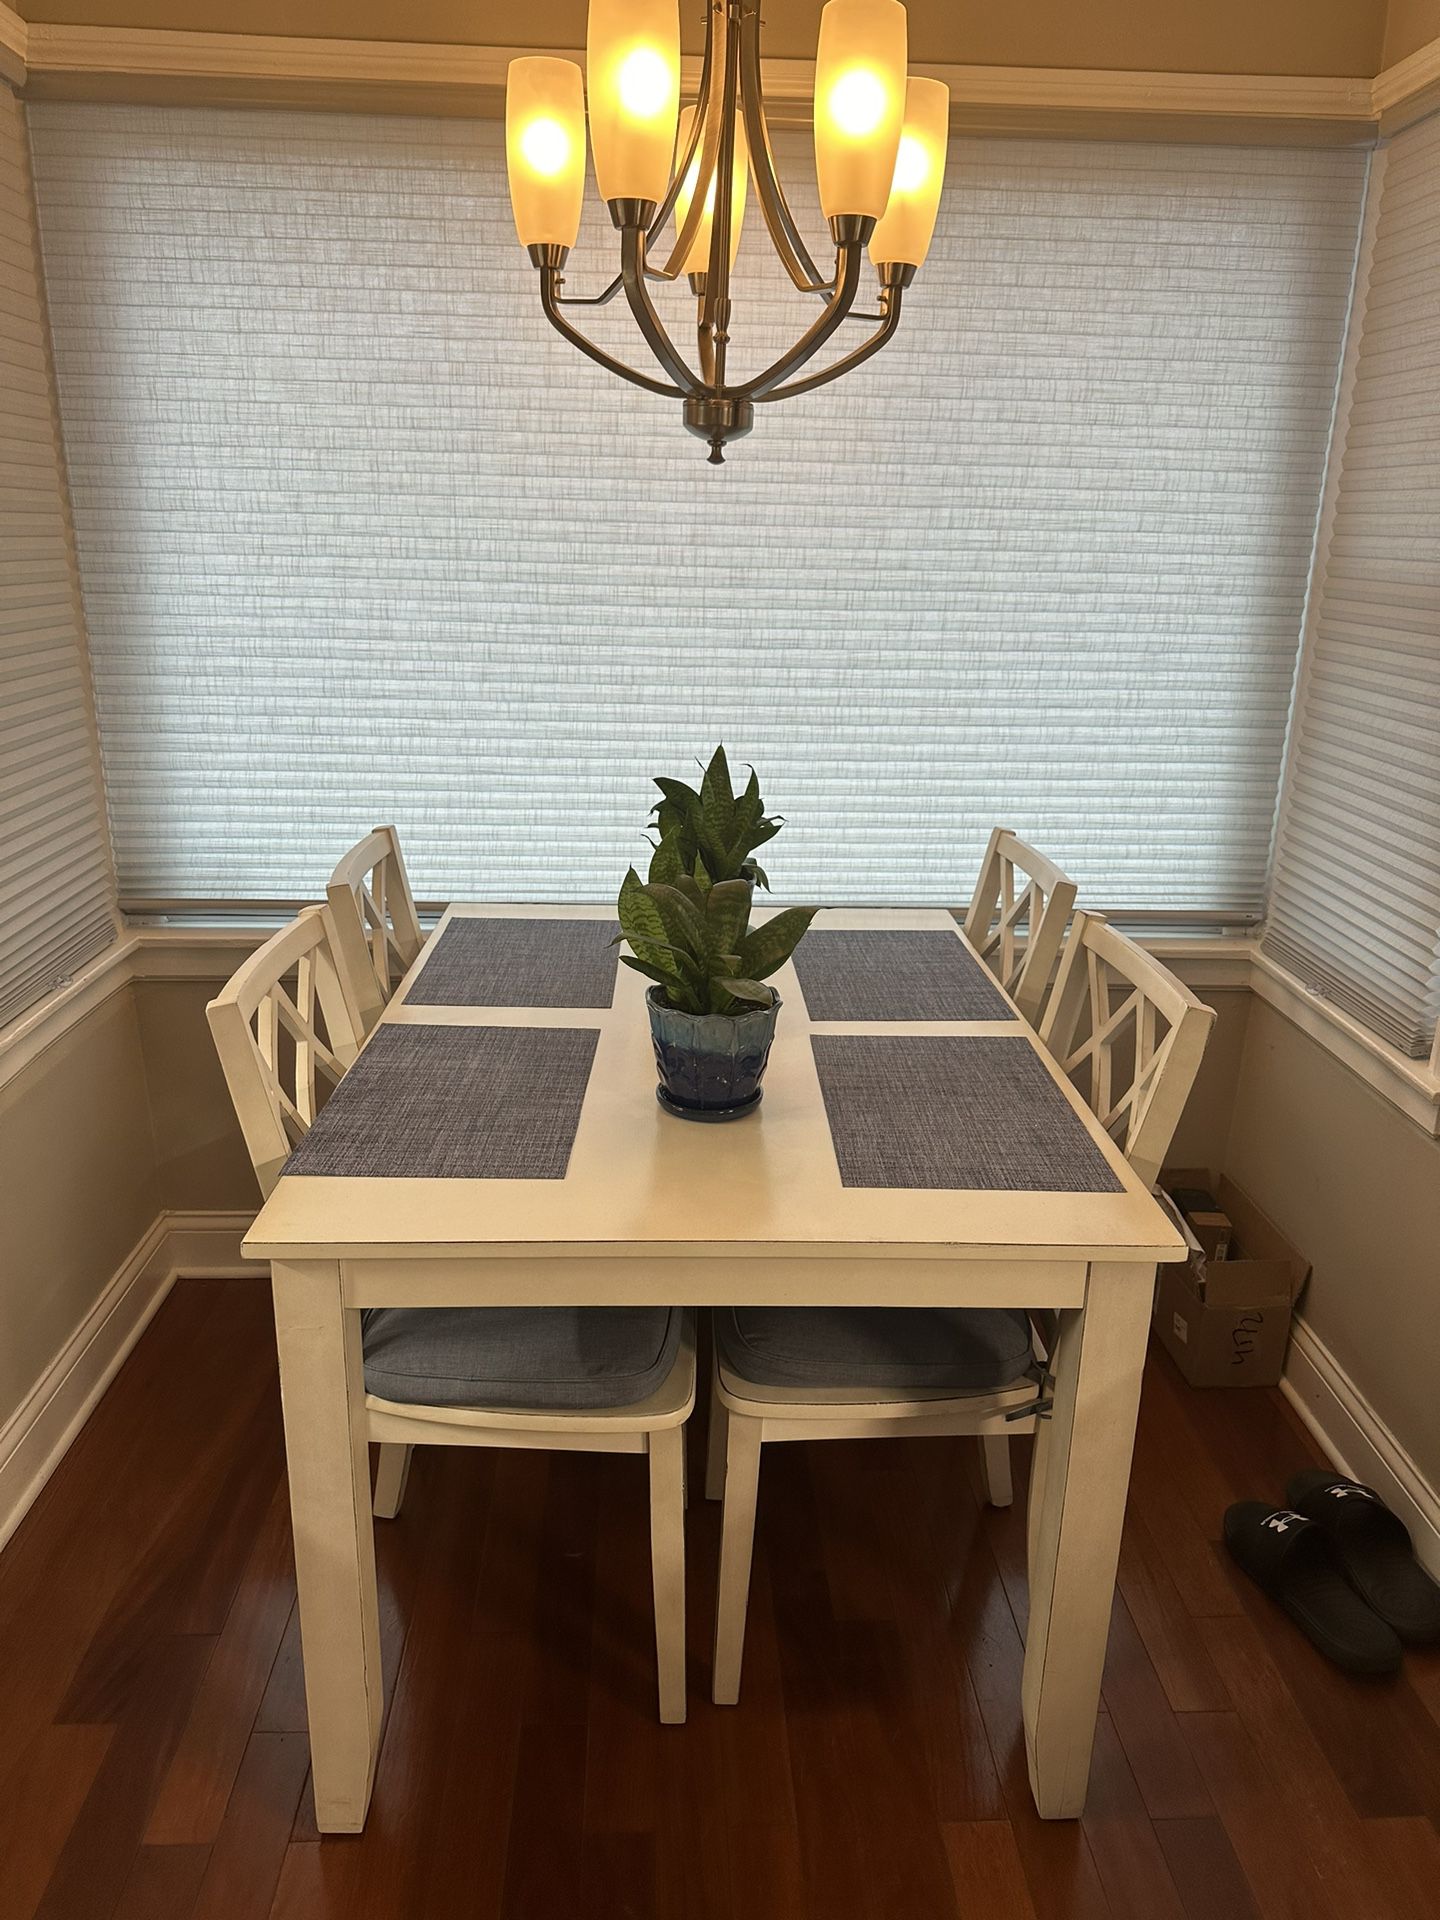 3’ X 4’ Kitchen Table And Chairs 